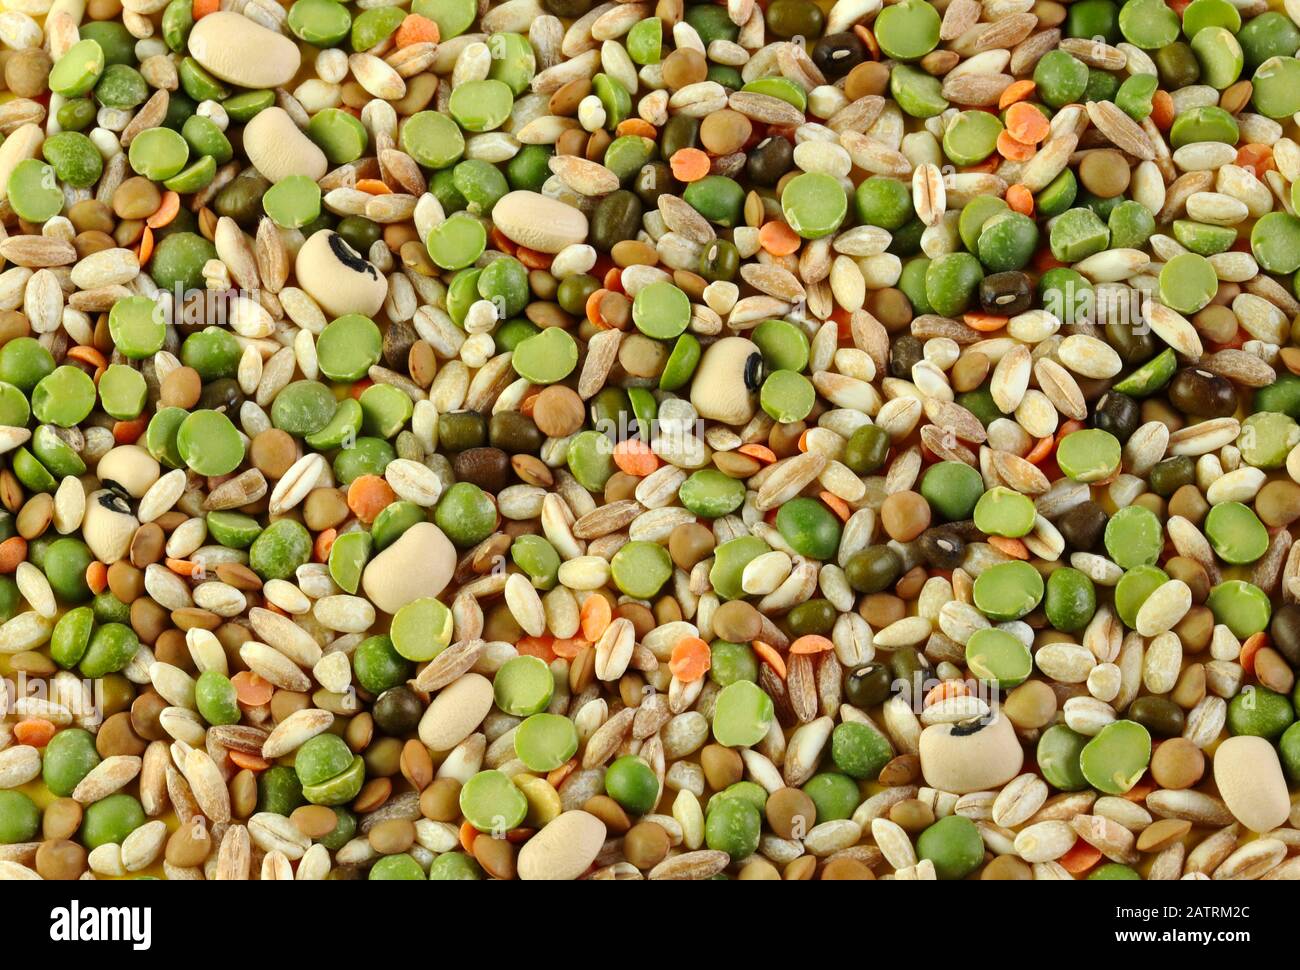 Food background of mixed dried legumes and cereals. Stock Photo